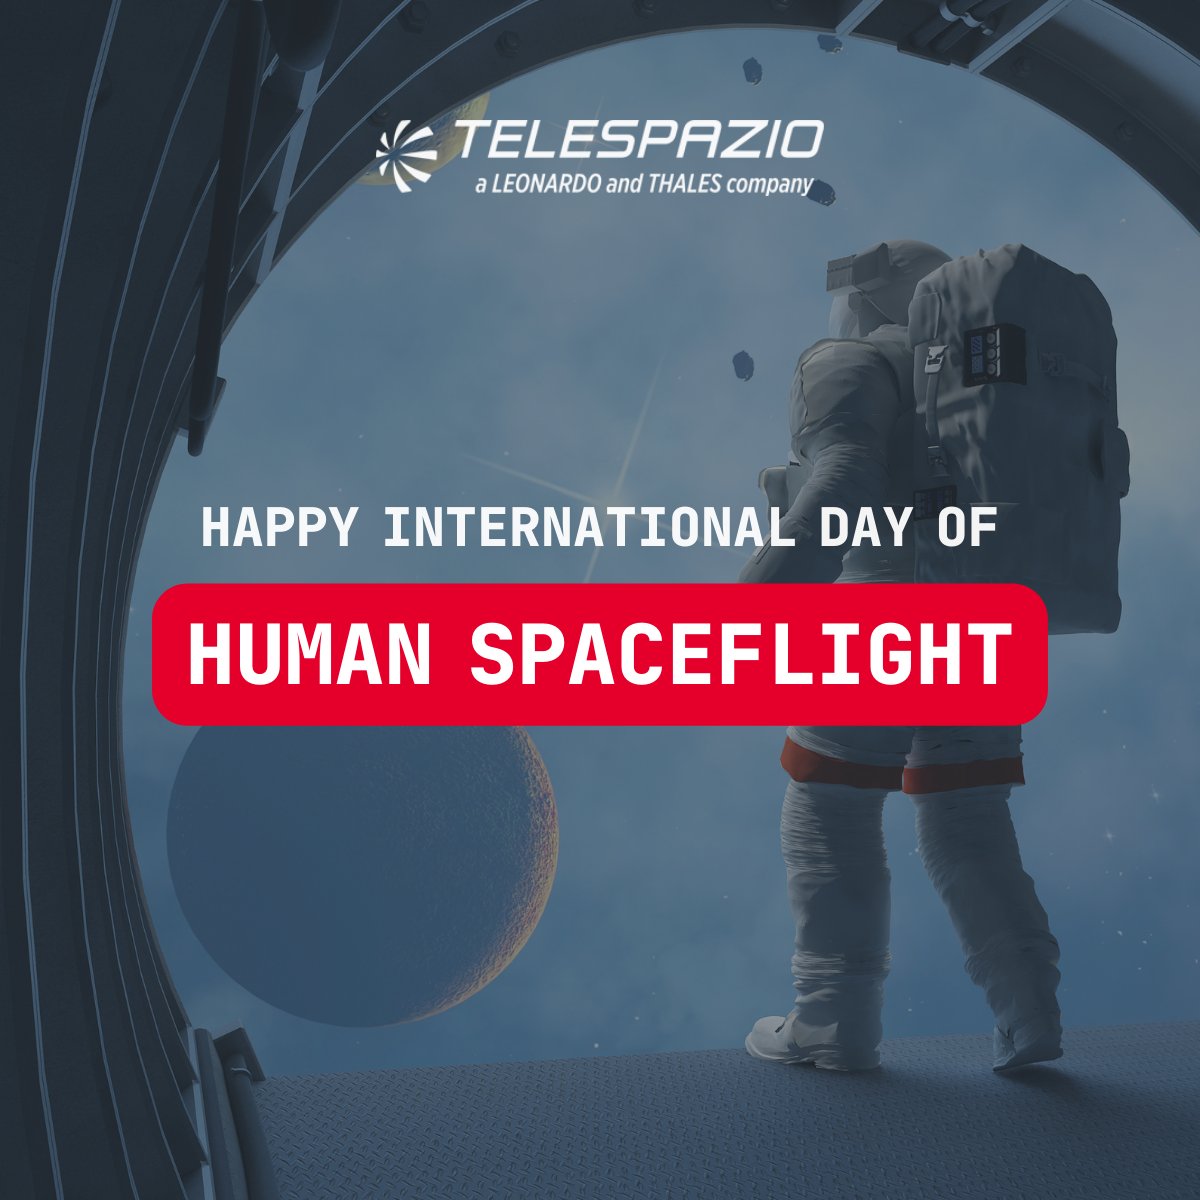 Happy International Day of Human Space Flight! 👩‍🚀👨‍🚀 Collaborating with the European Astronaut Centre (EAC) for more than 15 years... today is a special day for us at Telespazio Germany. Read more: telespazio.de/en/focus-detai… #spaceflight #columbus #astronaut